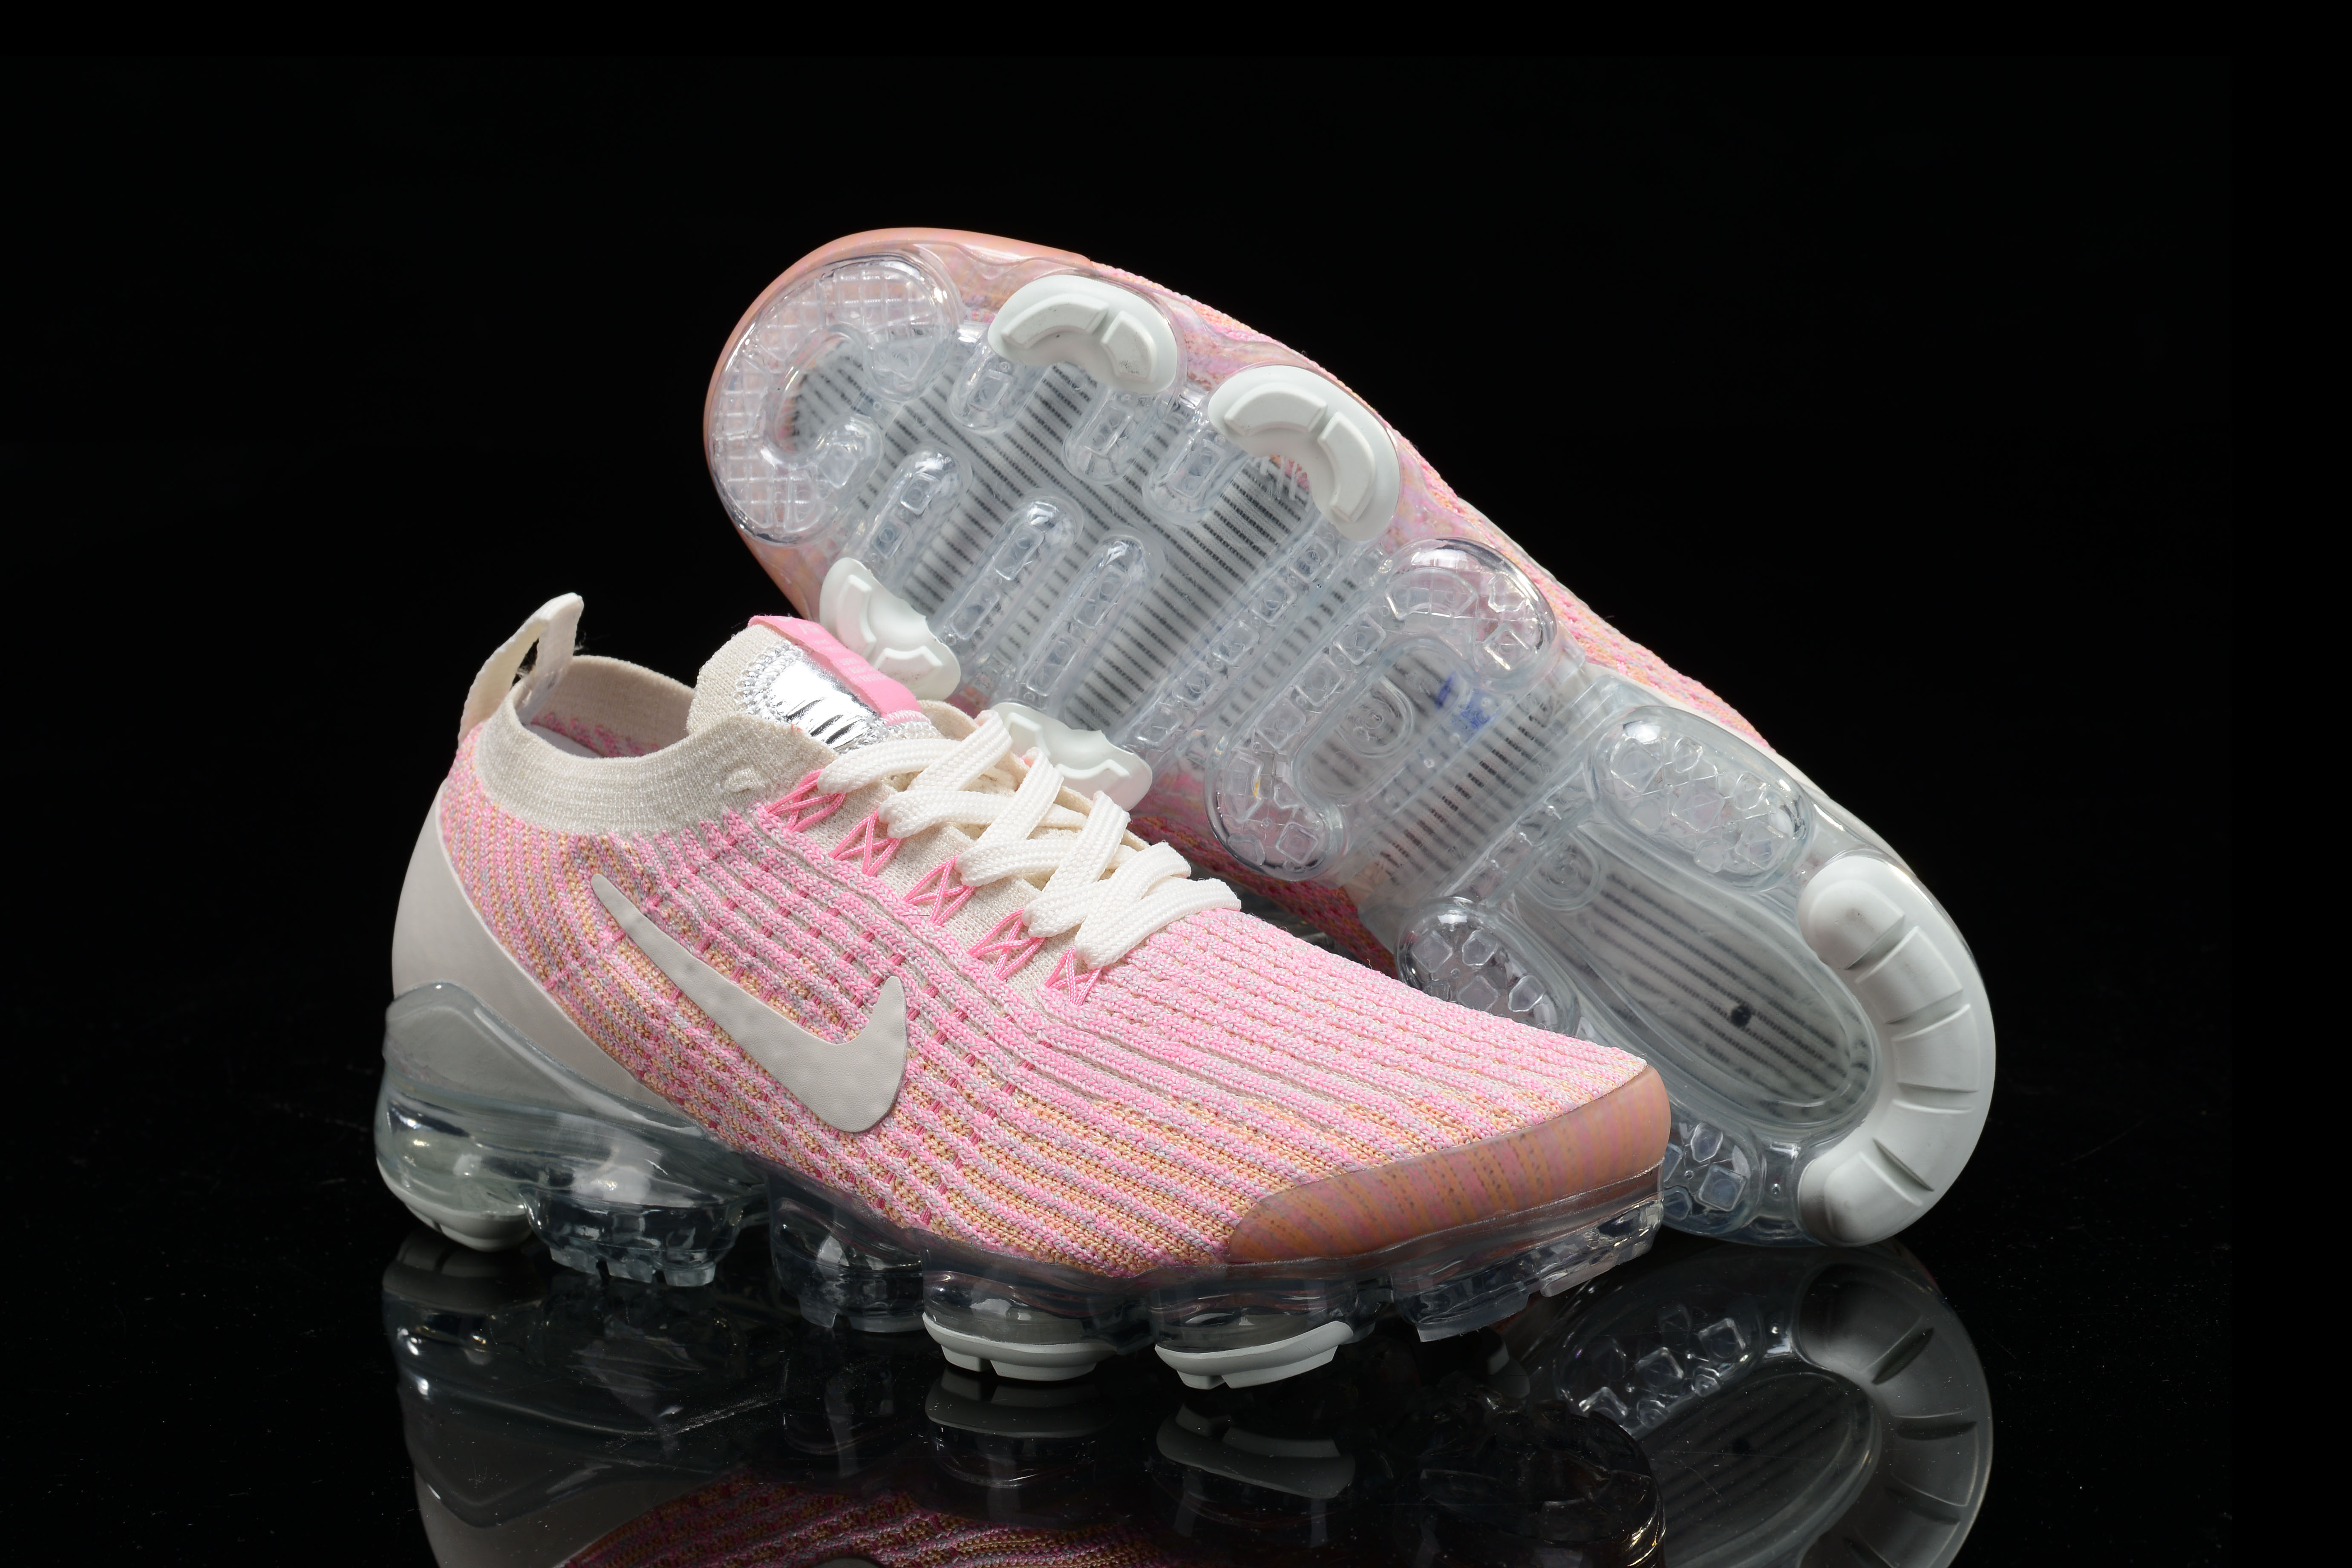 Women's Hot sale Running weapon Air Max Shoes 043